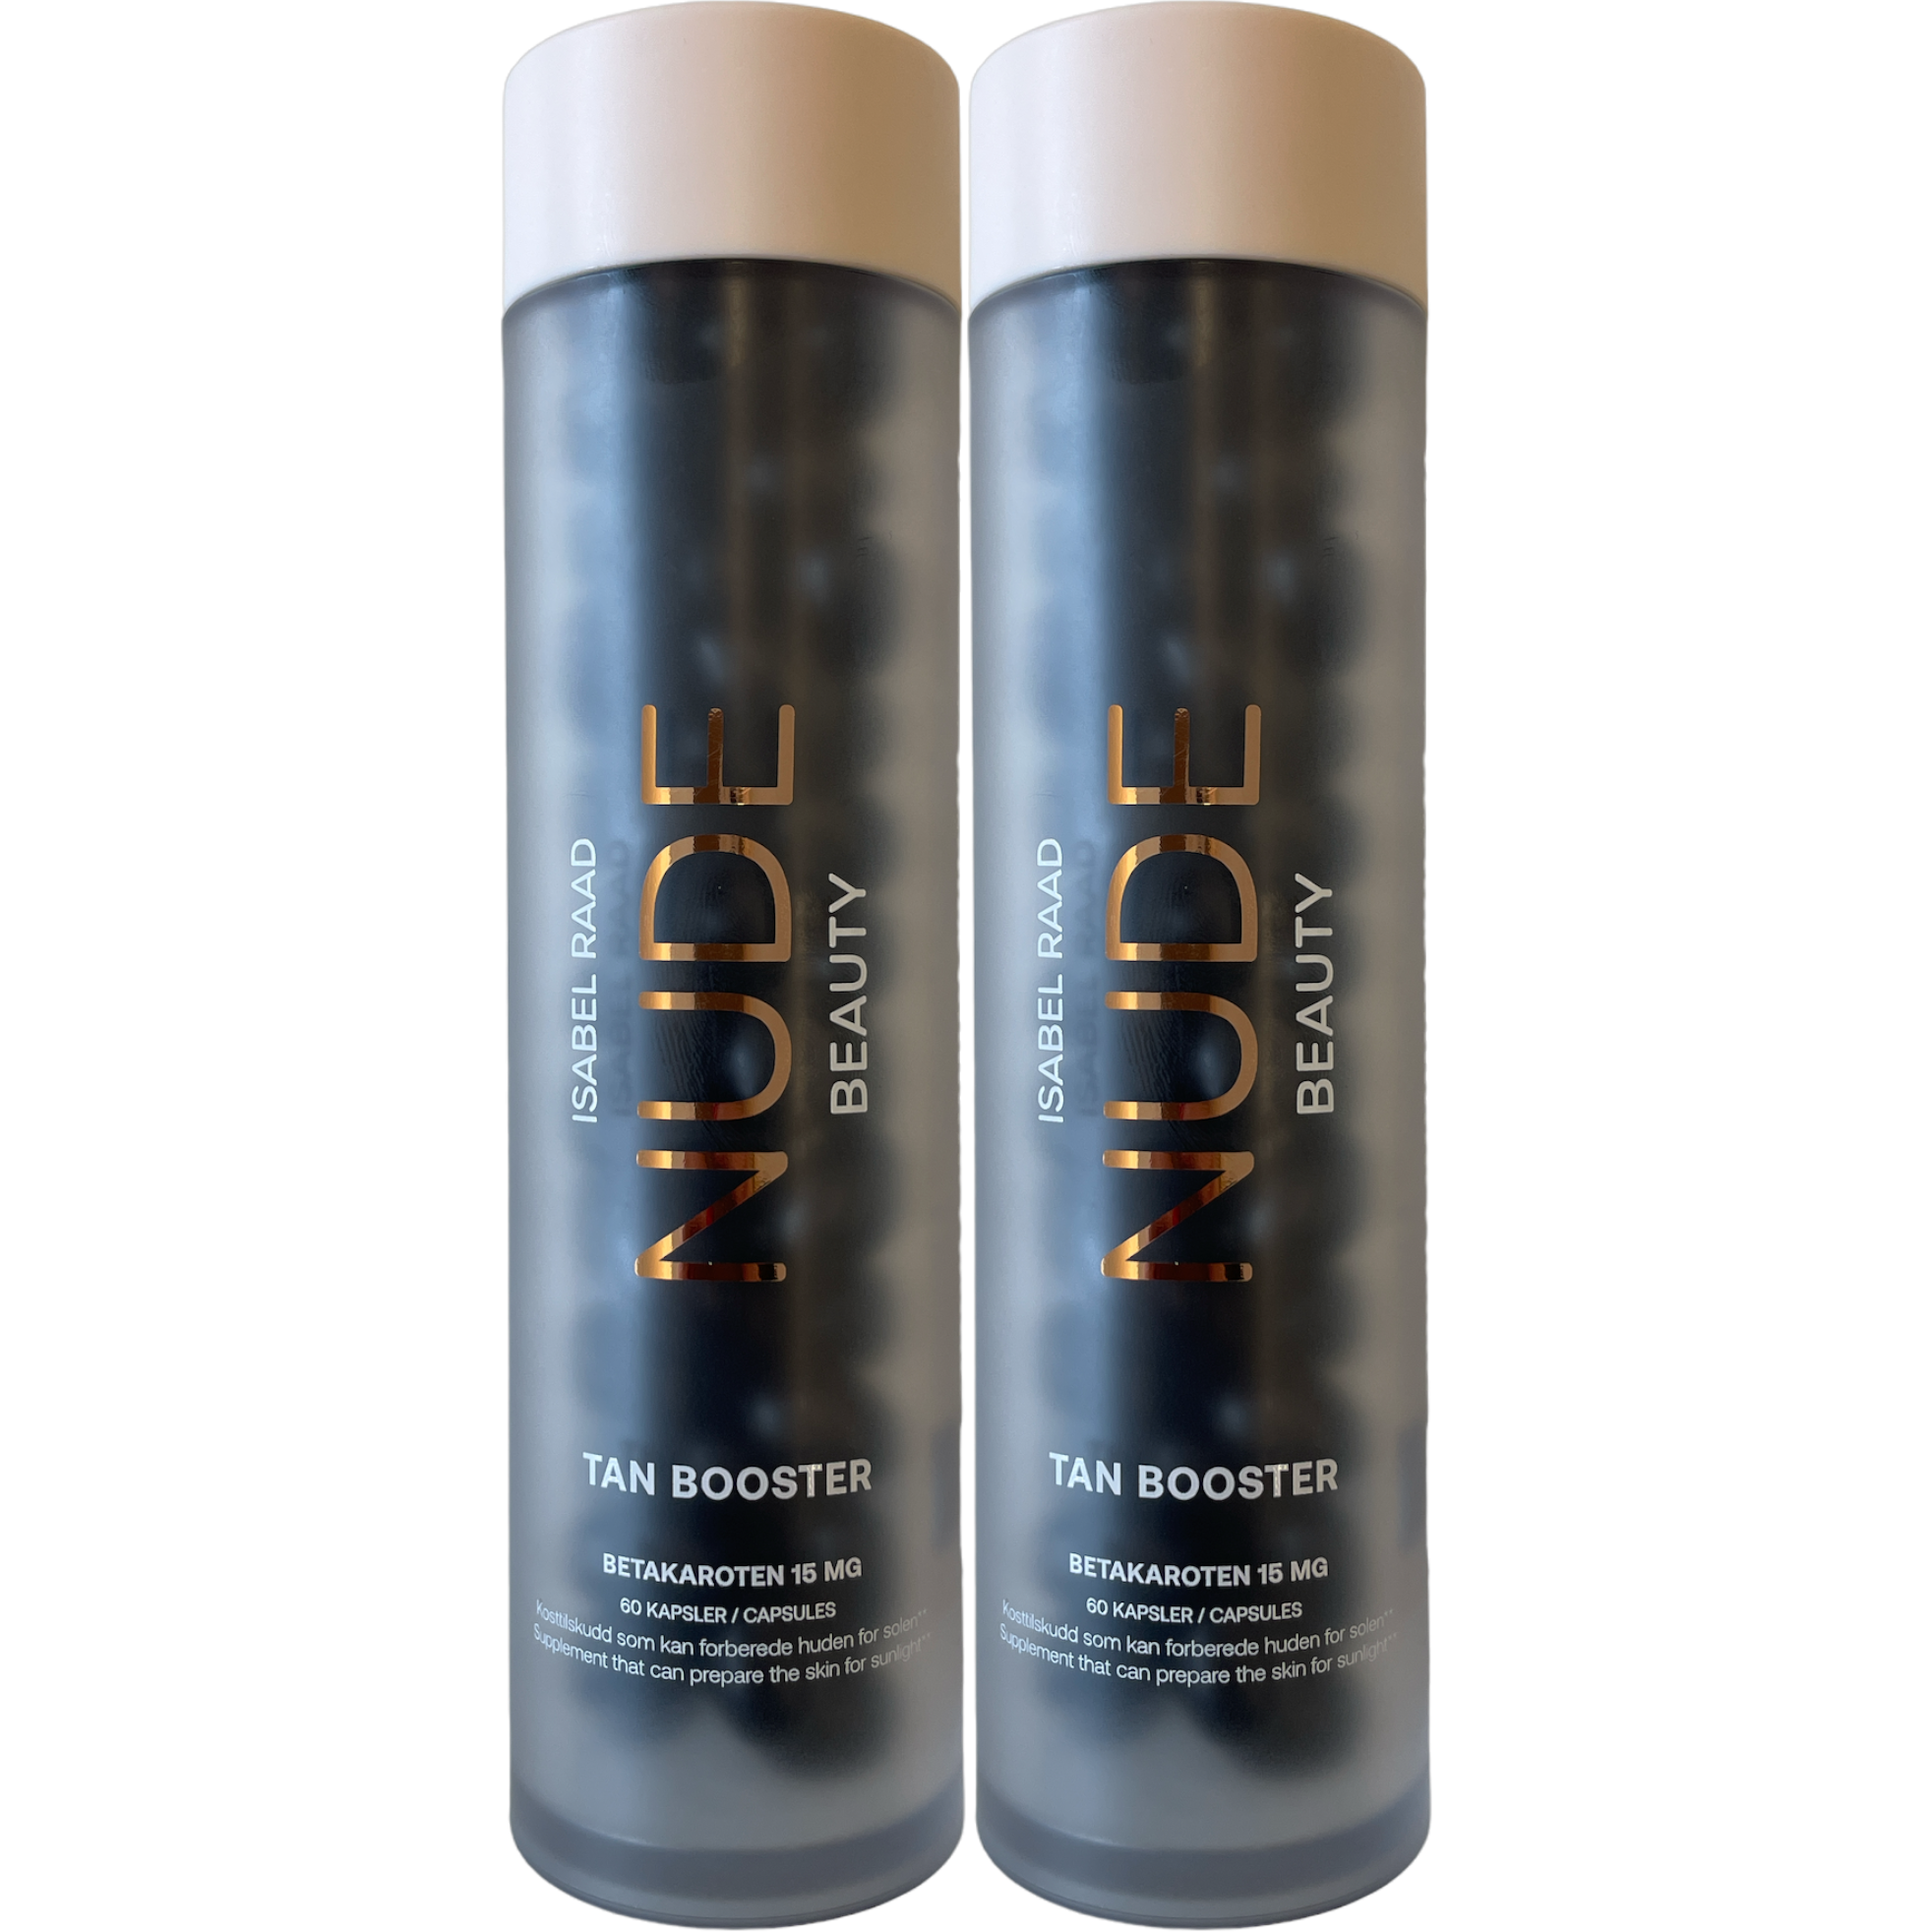 Nude Beauty Tan Booster Duo